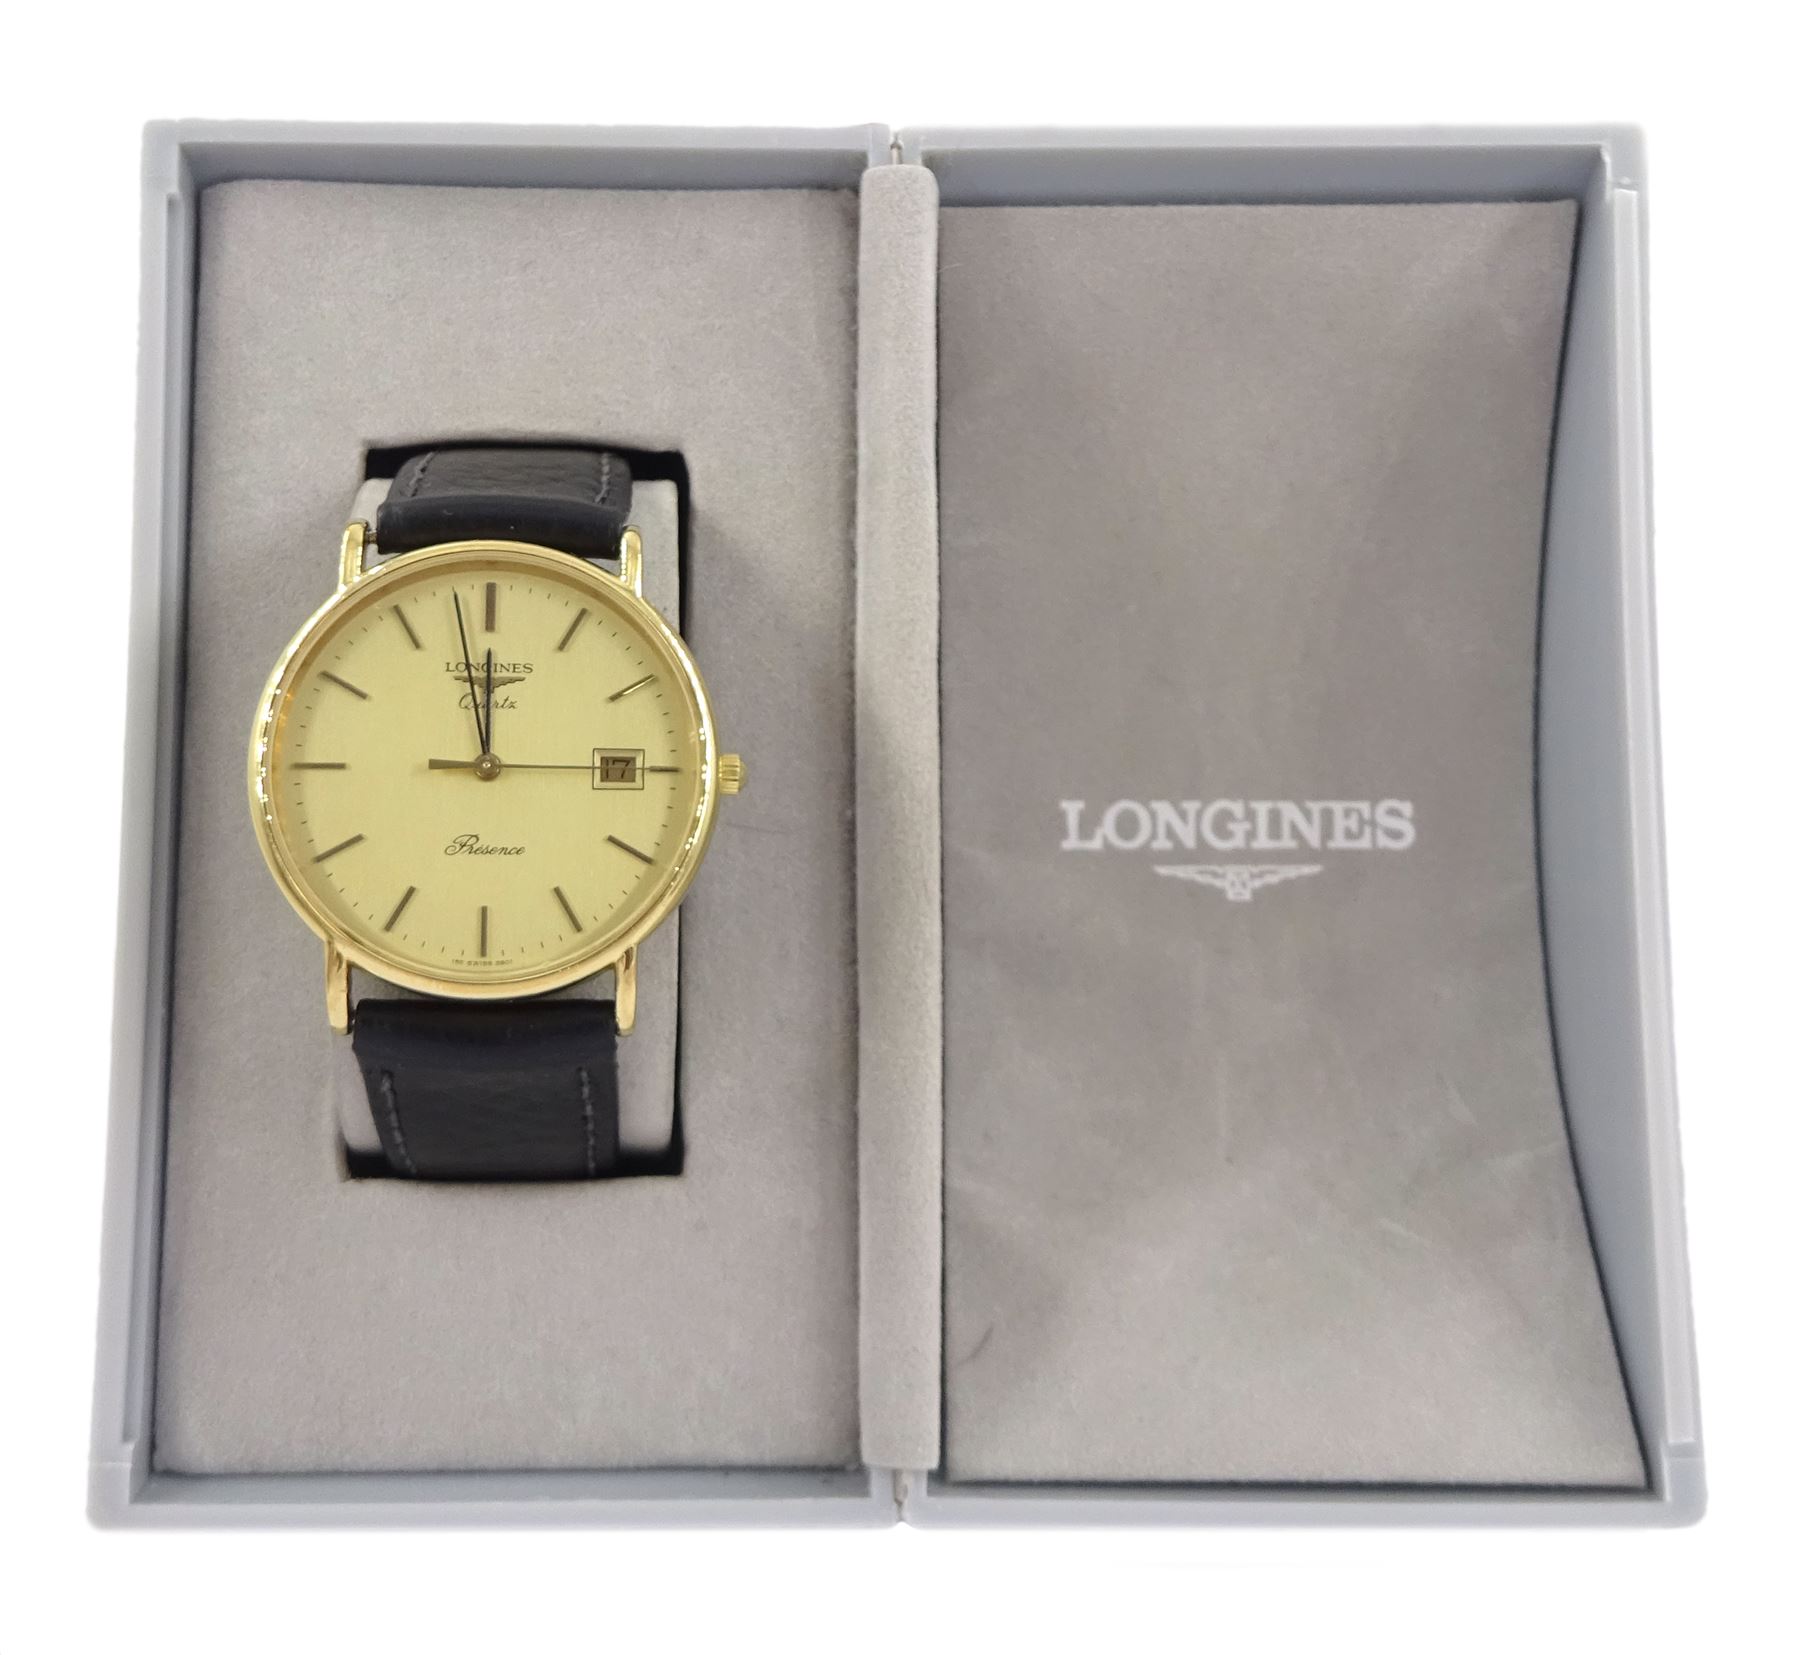 Longines Presence gentleman's gold-plated and stainless steel quartz wristwatch - Image 2 of 4